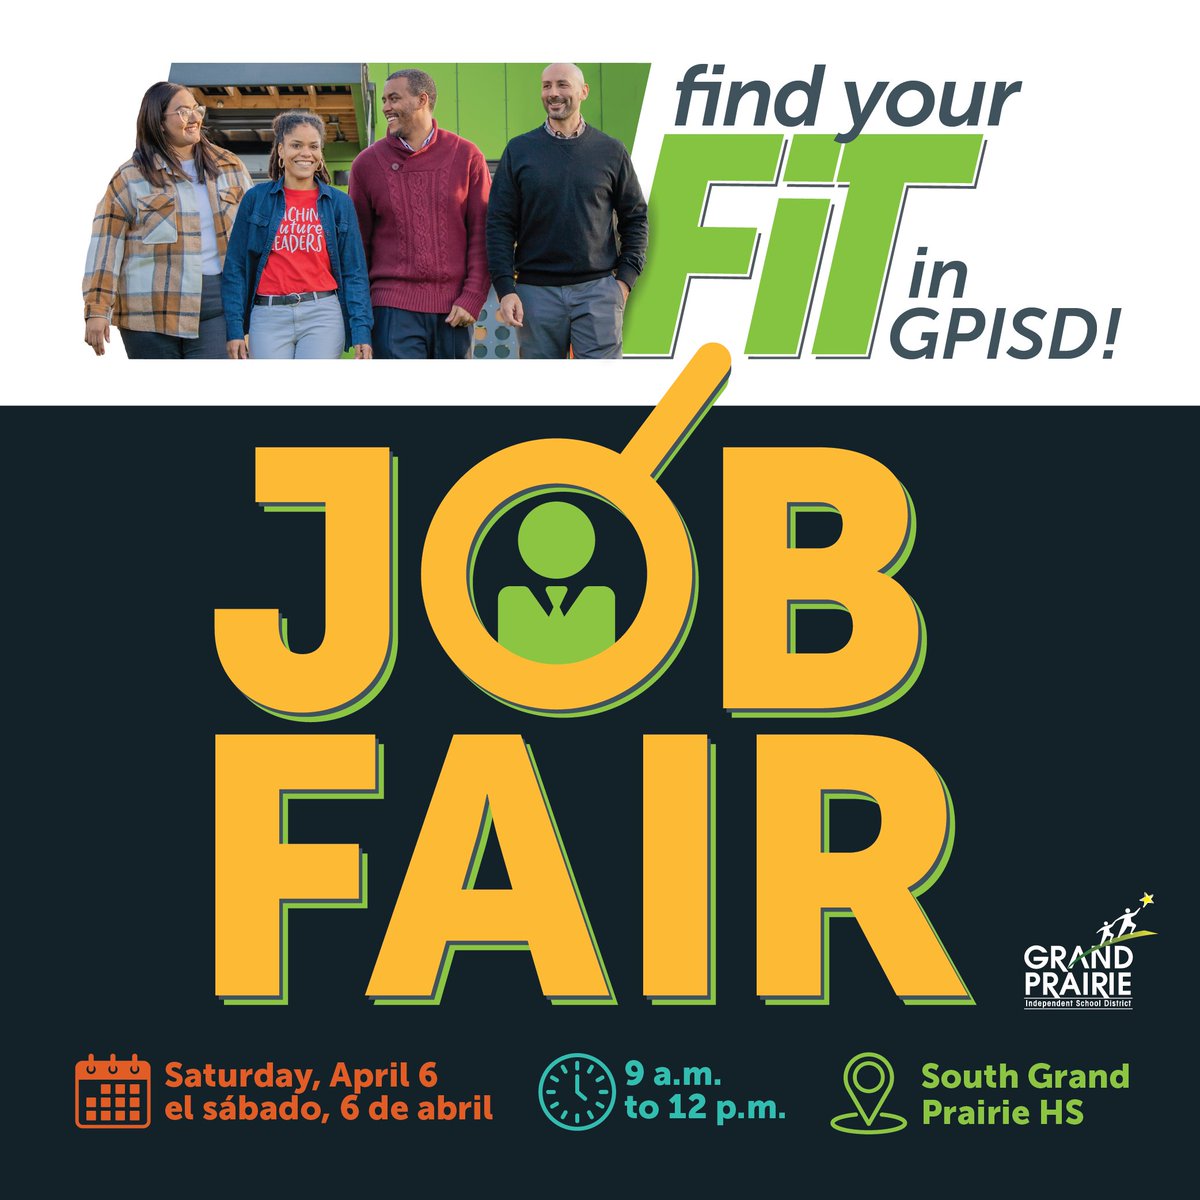 GPISD is looking for dedicated & compassionate professionals to fill vacancies across the district. Plan to attend our job fair on April 6, 9 am to 12 pm at South Grand Prairie HS located at 301 W Warrior Trail, Grand Prairie, TX 75052. To register visit gpisd.org/jobfair.